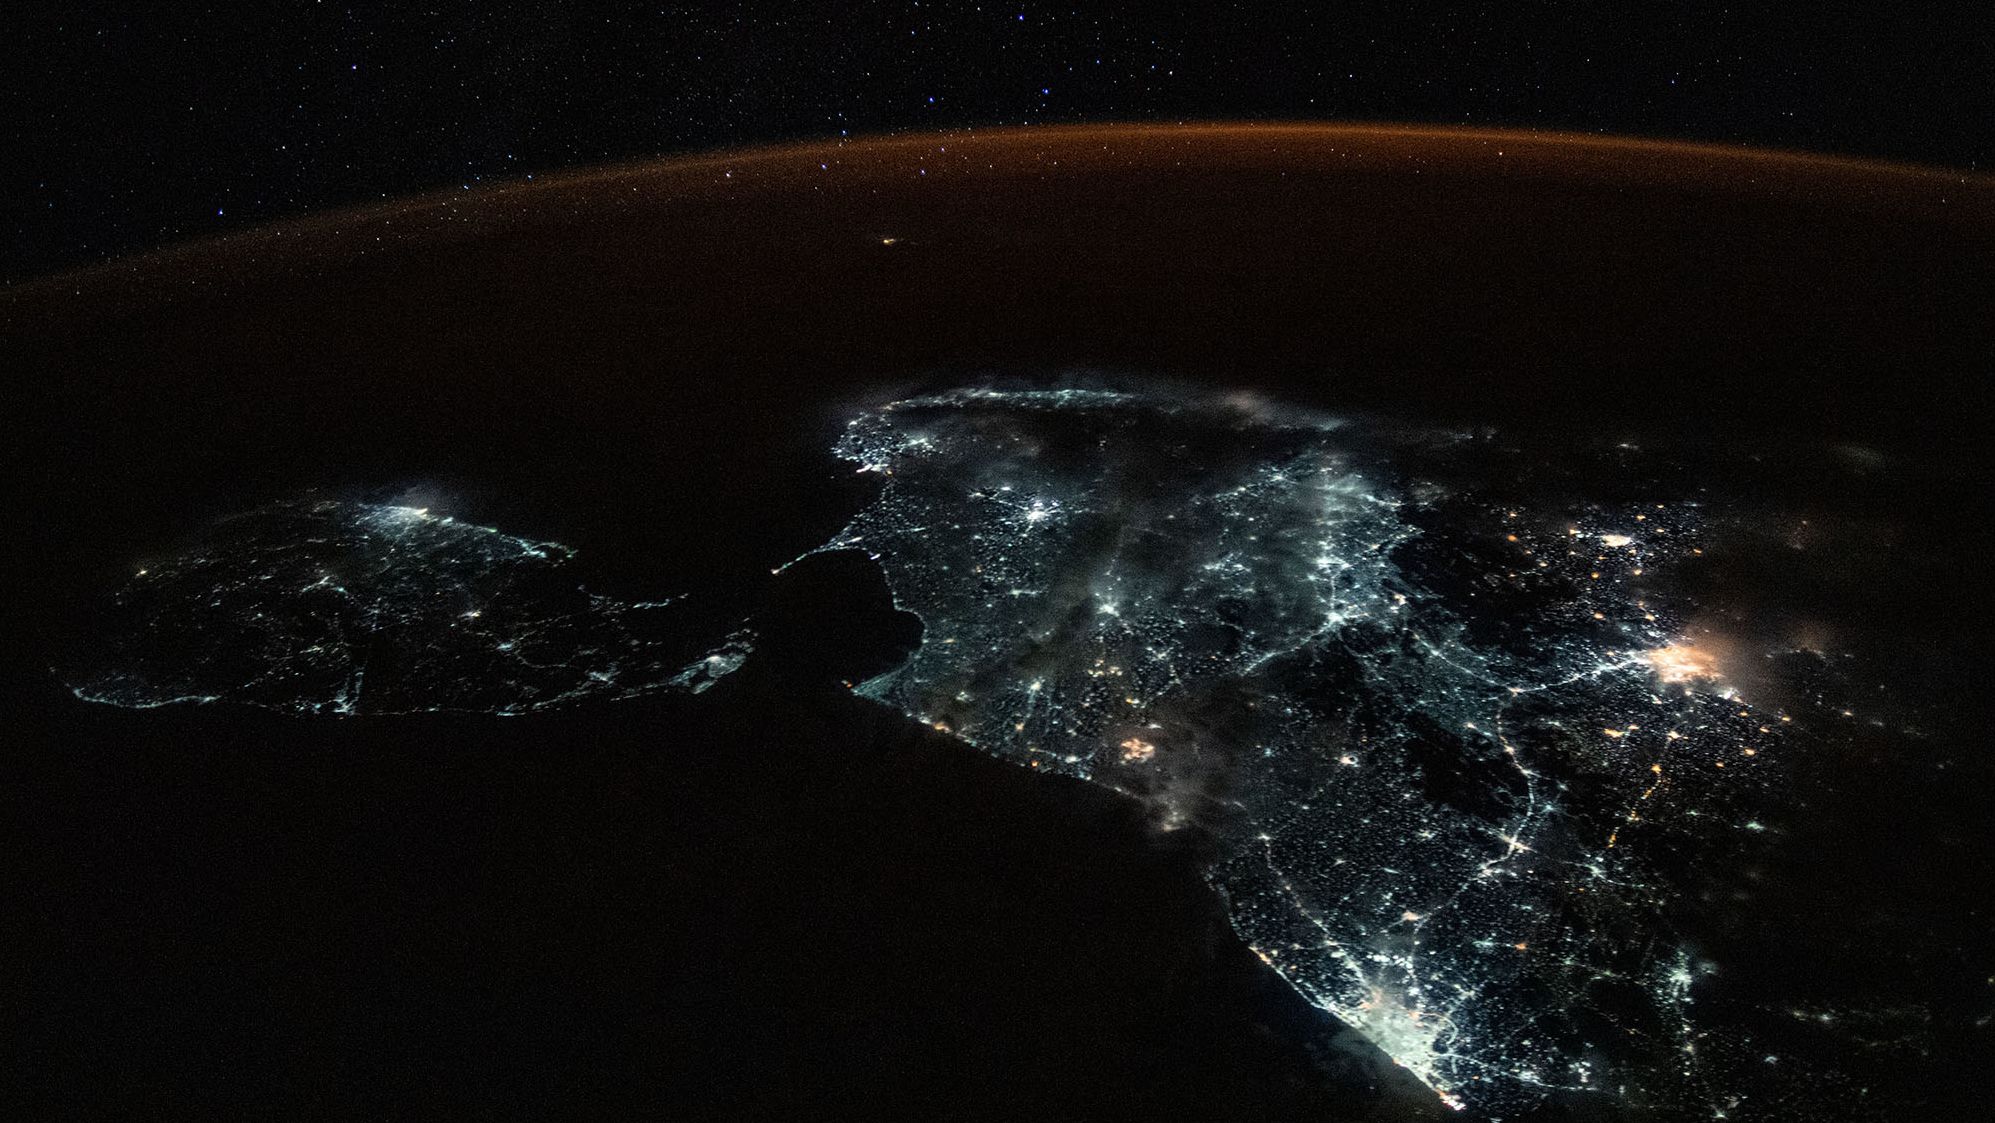 Sri Lanka and the brightly lit southern tip of India are shown in this photograph from the International Space Station on July 24. A starry sky and an atmospheric glow frame the Earth's horizon.